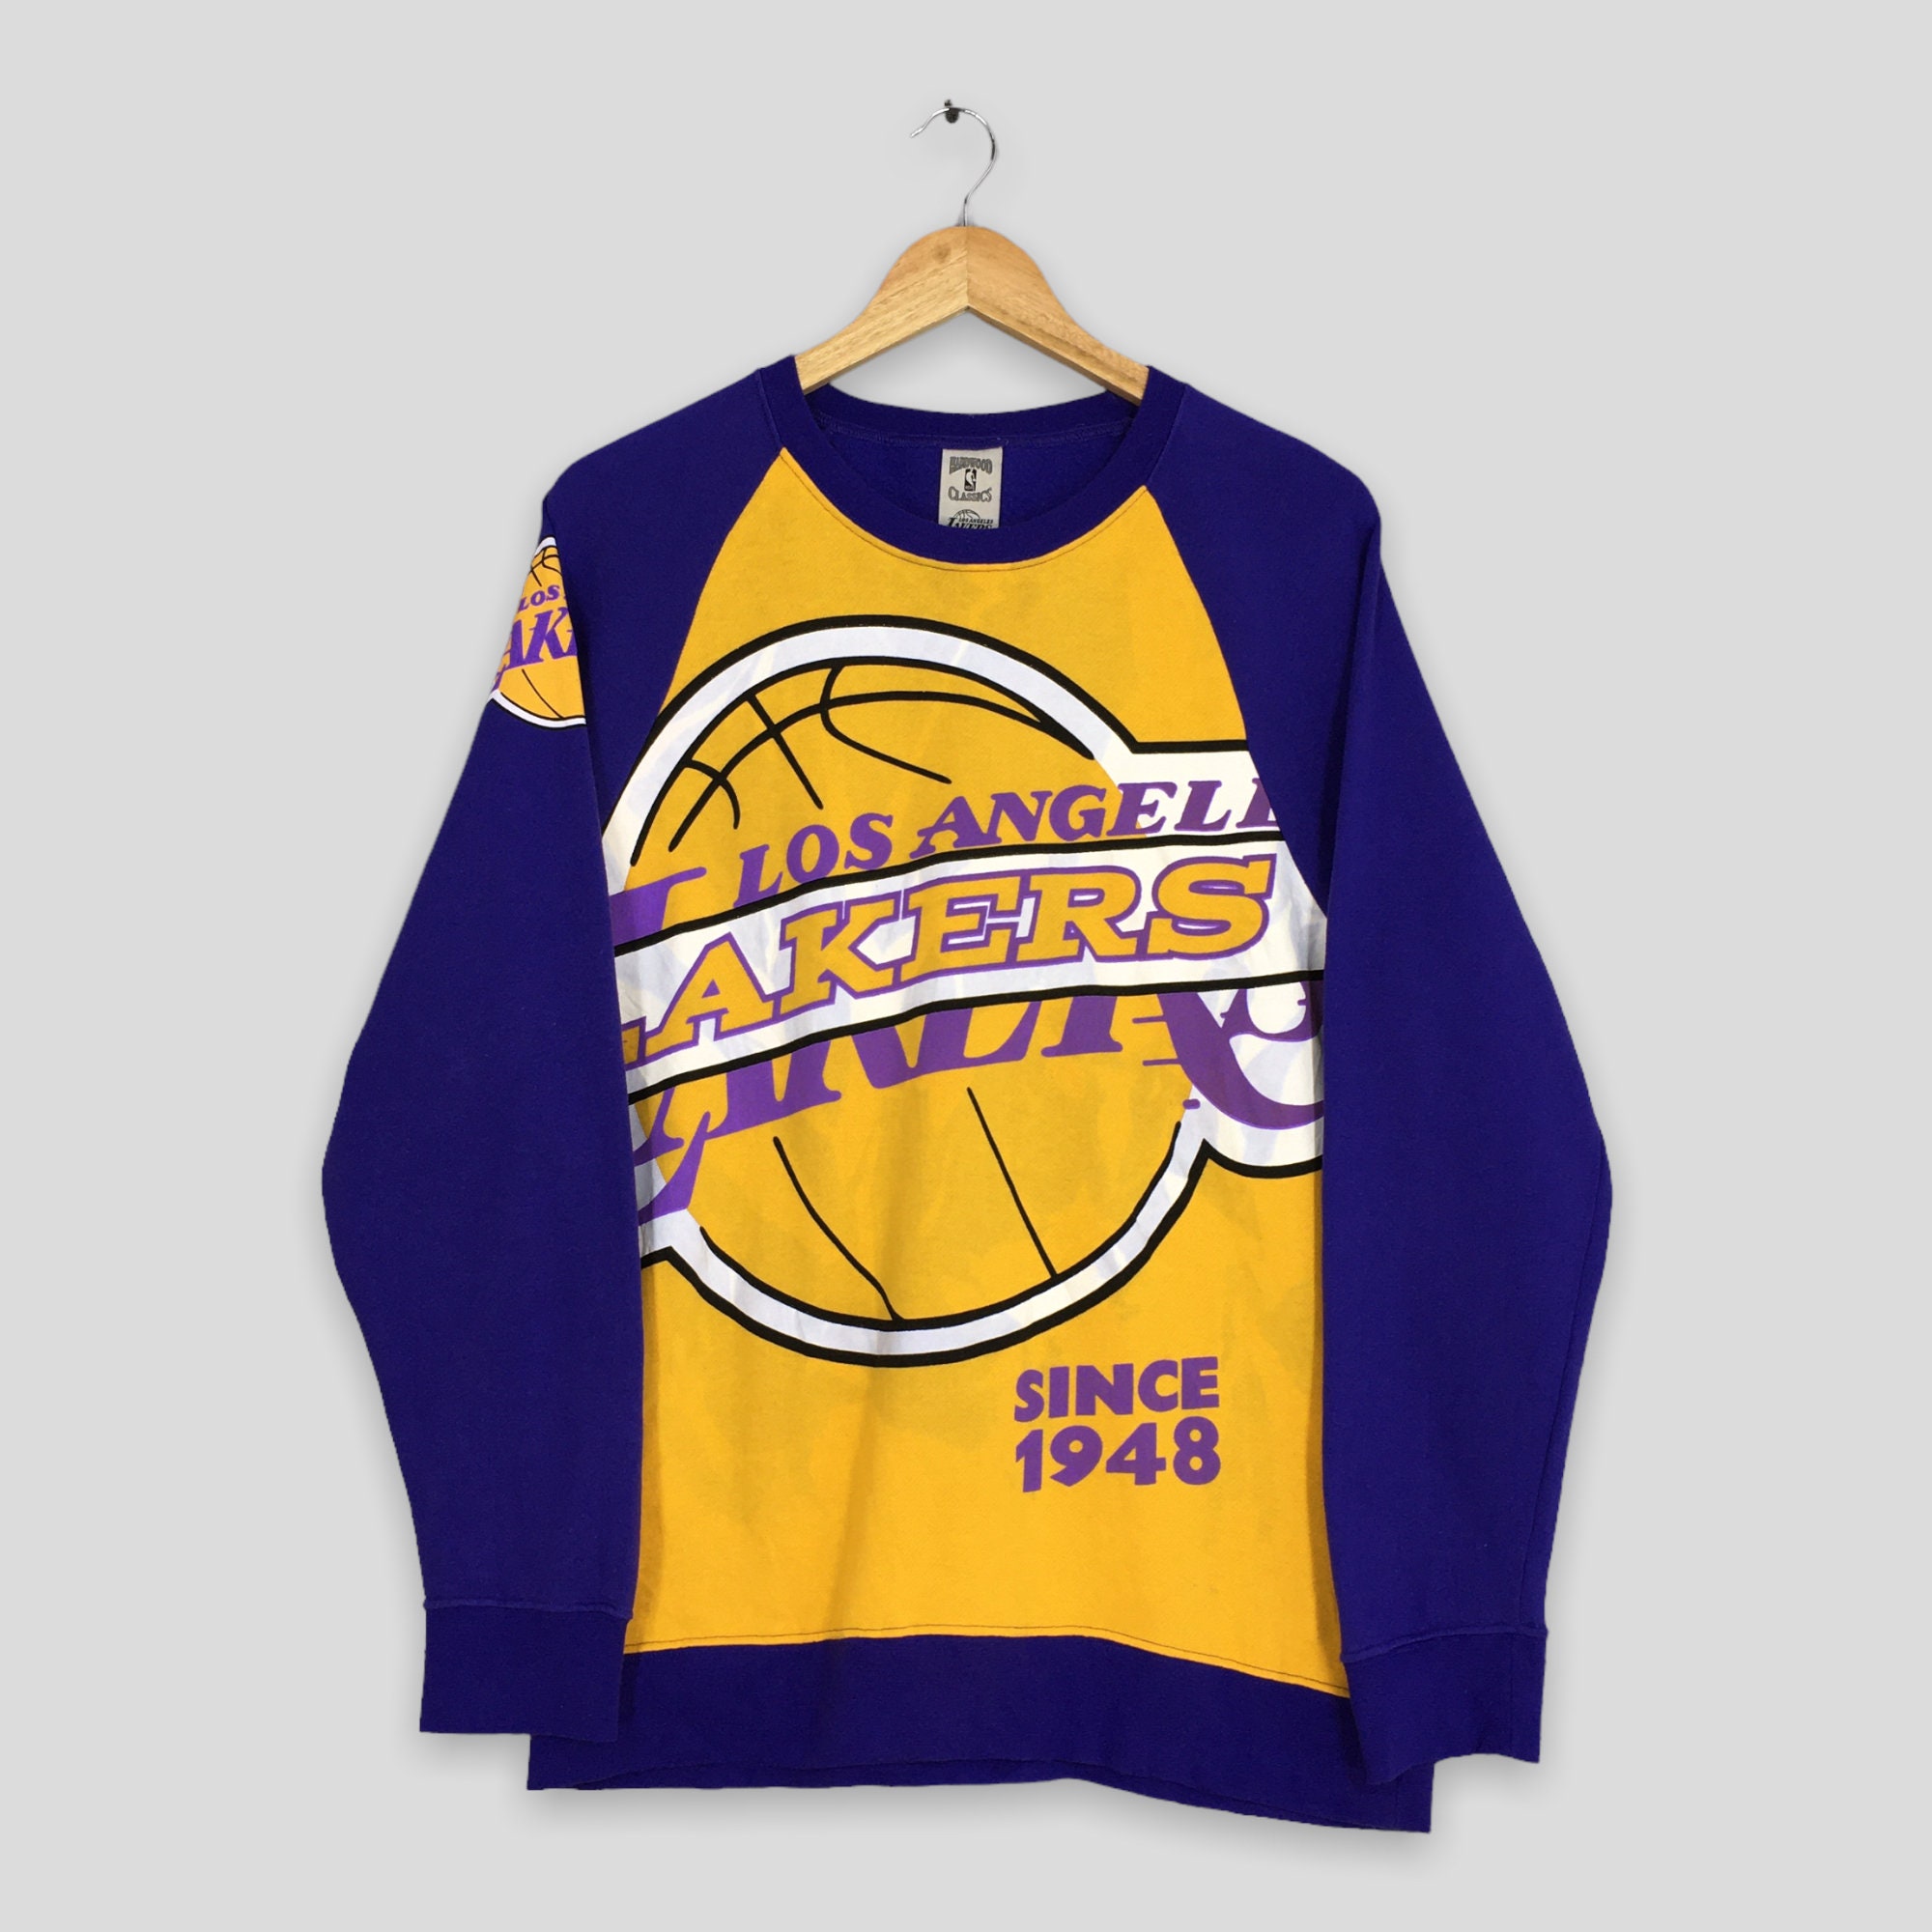 Vintage Puma 90's NBA Los Angeles Lakers Embroidered Sweater Grey (L)